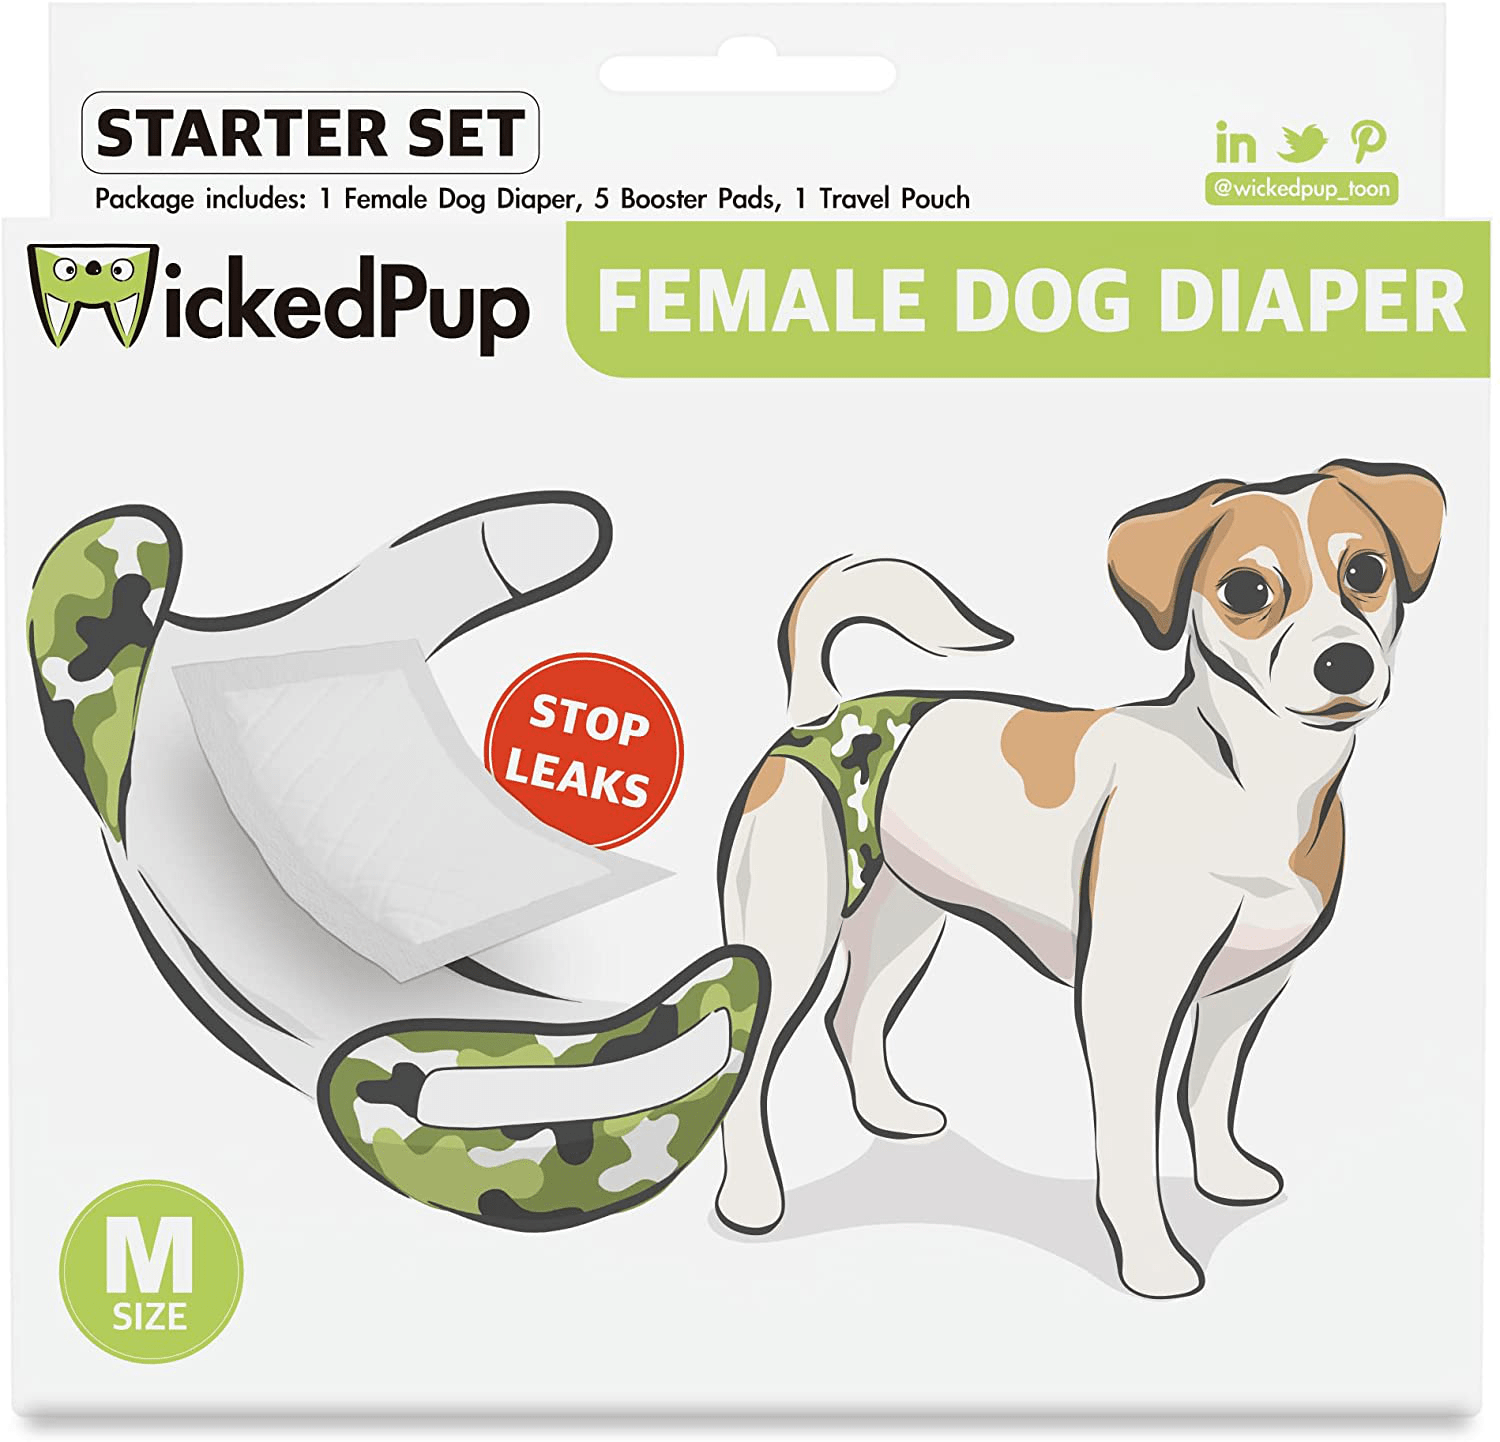 WICKEDPUP Washable Female Dog Diaper (1 Pack) with Disposable Pet Diaper Liners (5 Count), Puppy Training Treat Bag (1 Pouch) | Reusable Period Panty plus Booster Pads, Cloth Dog Travel Pocket